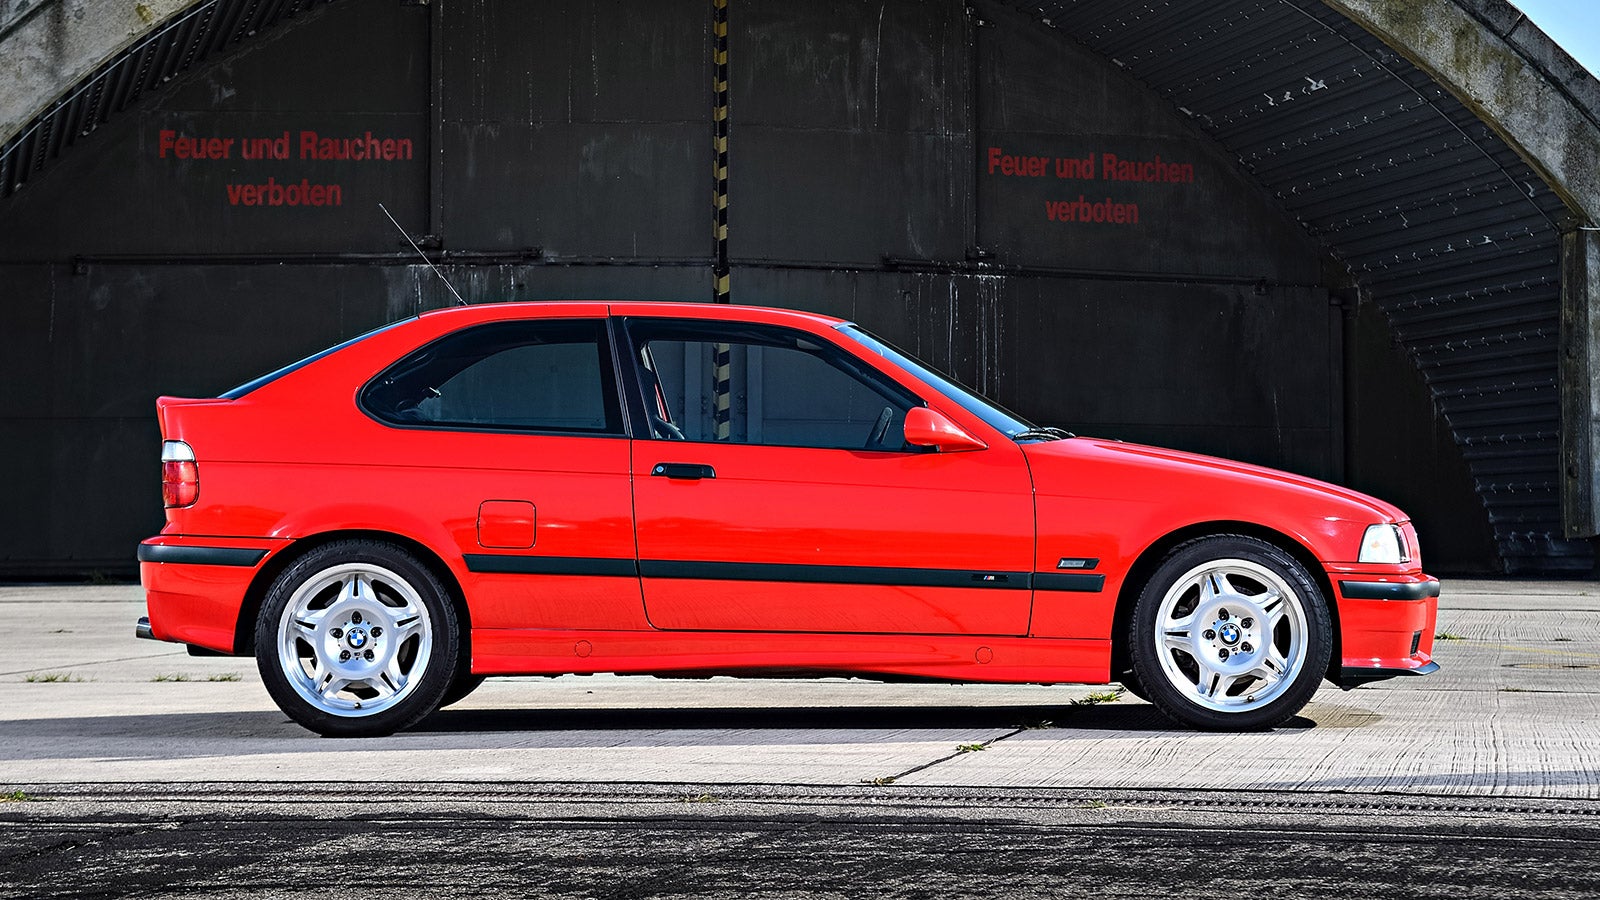 Let BMW Show You Around The Coolest Version Of The Coolest E36 3 Series